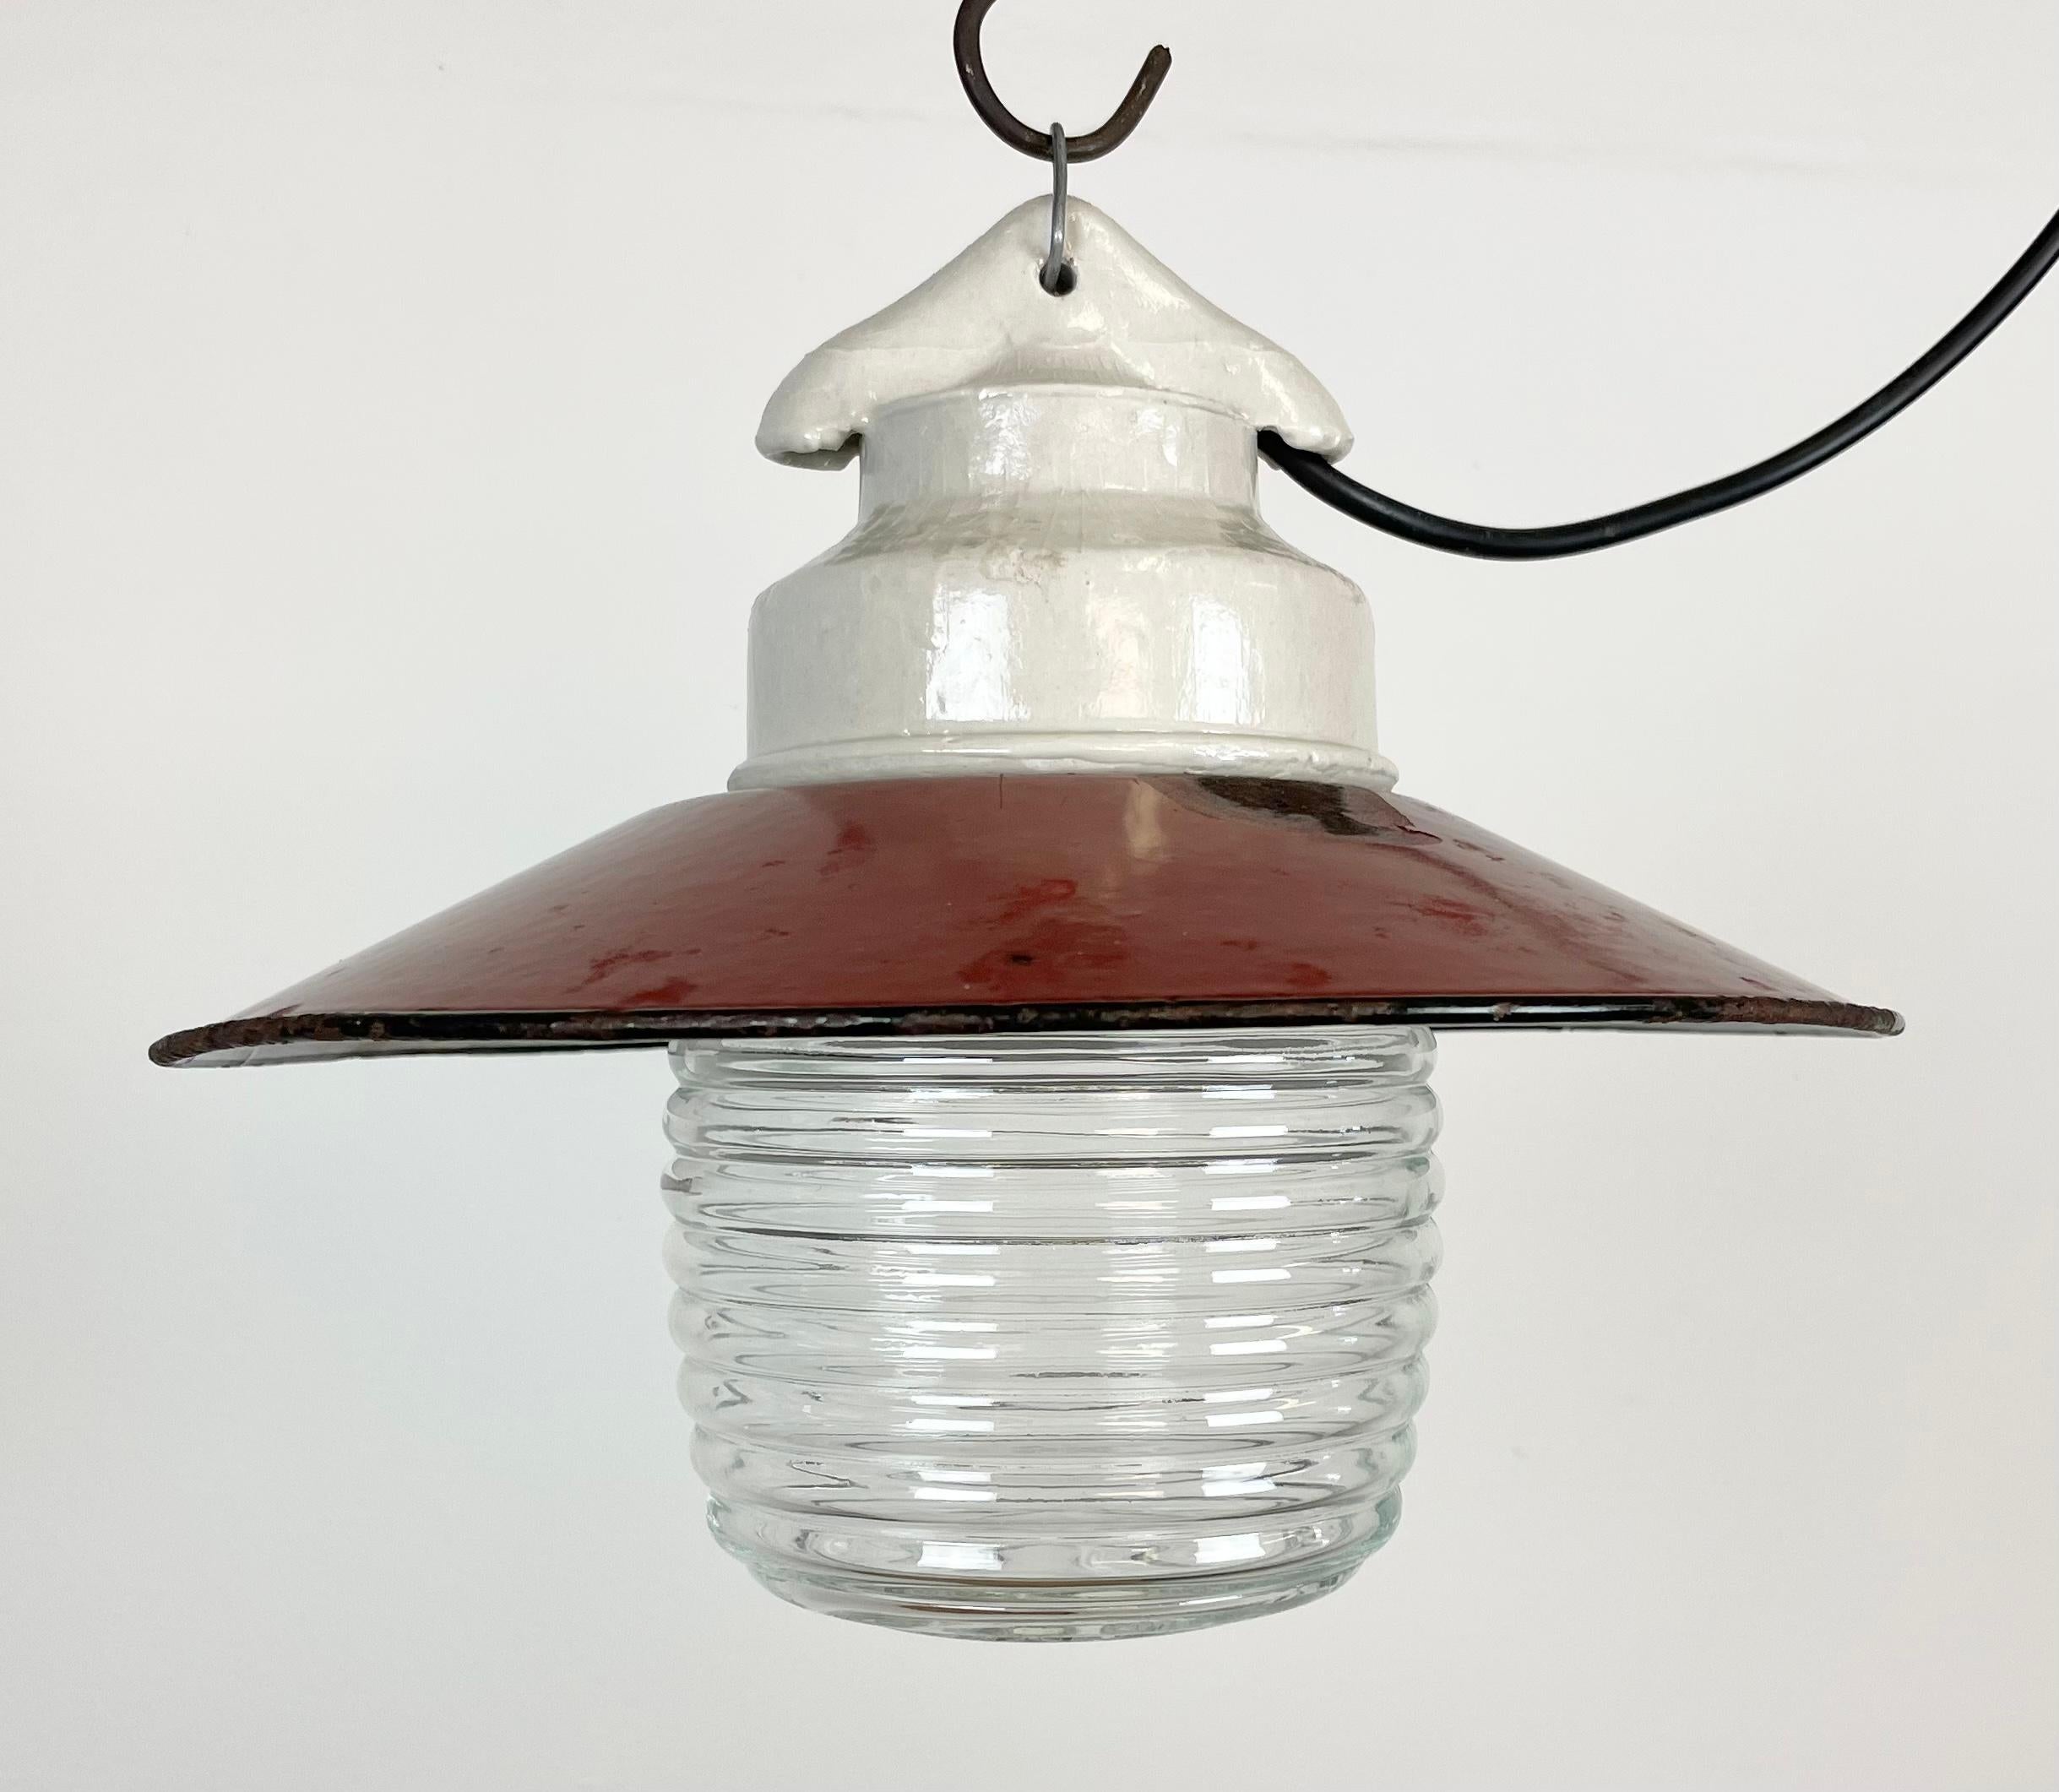 Vintage industrial light made in former Soviet Union during the 1970s.It features white porcelain top, red enamel shade with white enamel interior and ribbed clear glass cover. The socket requires E27/ E26 light bulbs. New wire. The weight of the